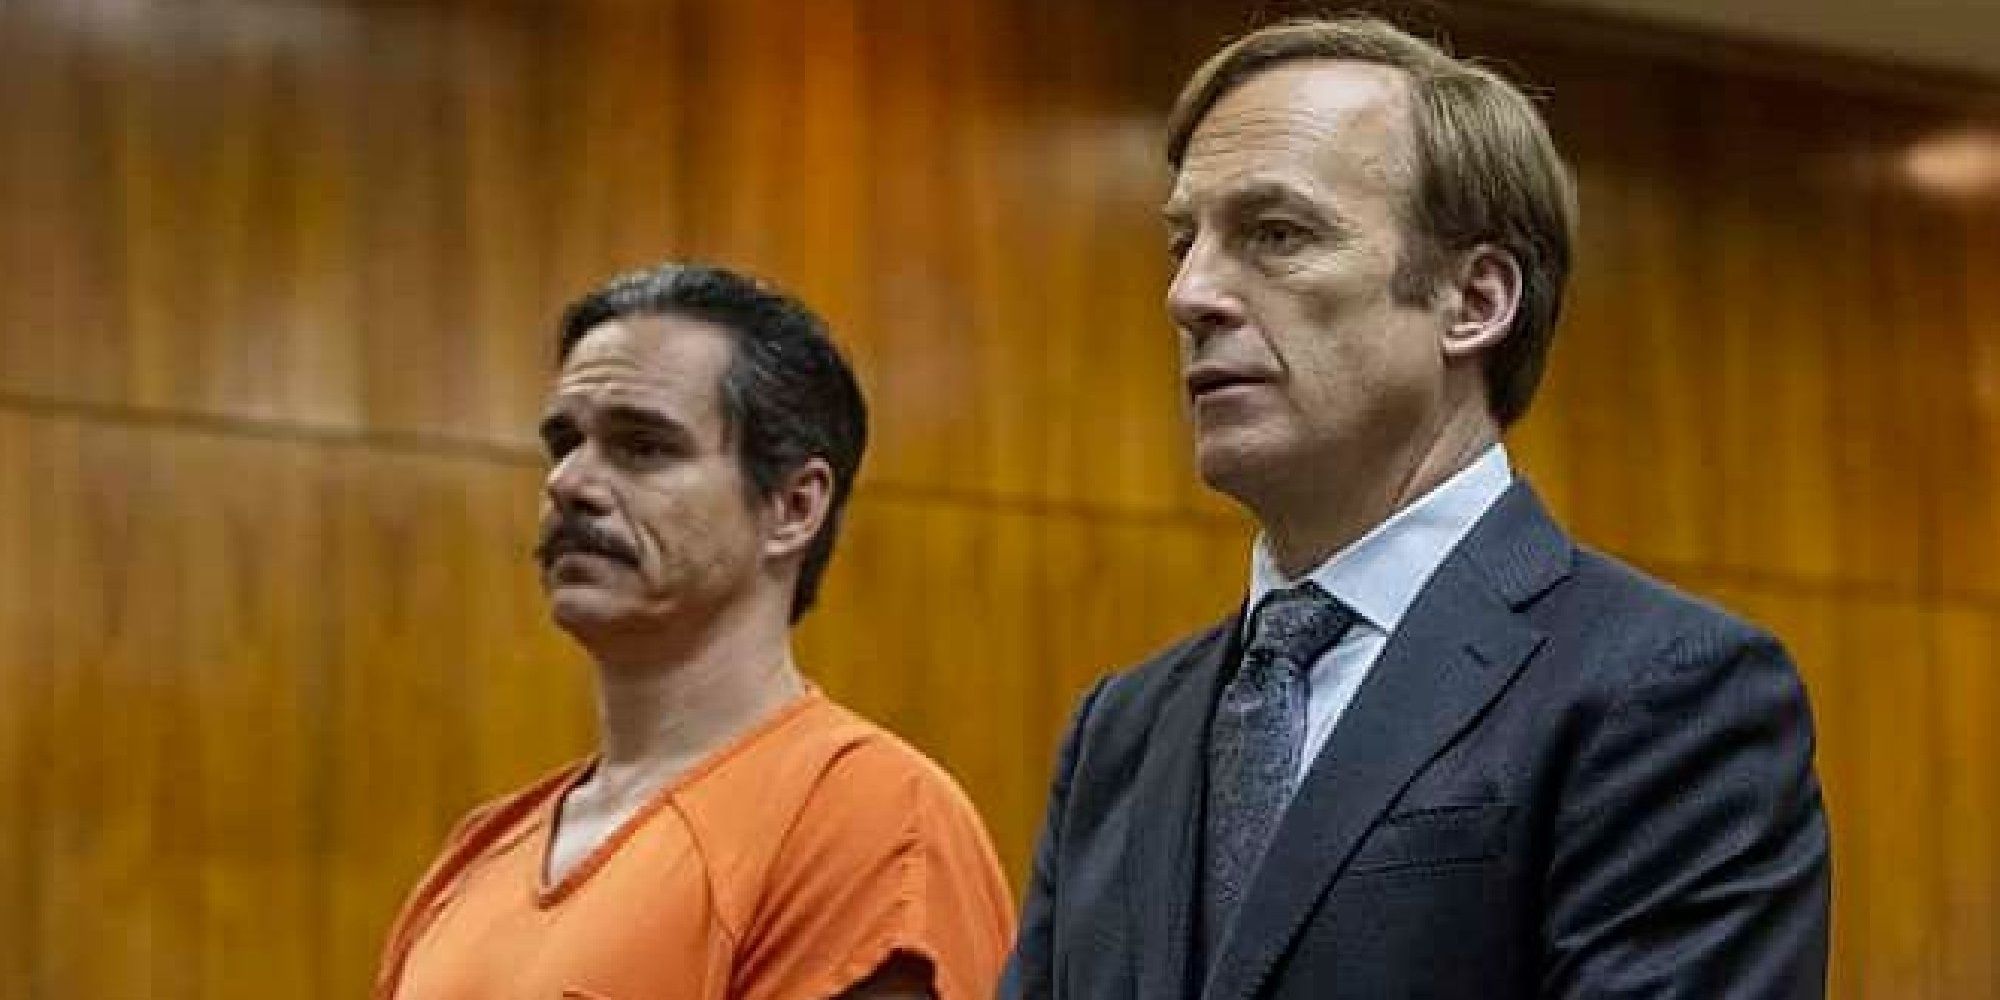 Jimmy and Lalo in court in Better Call Saul